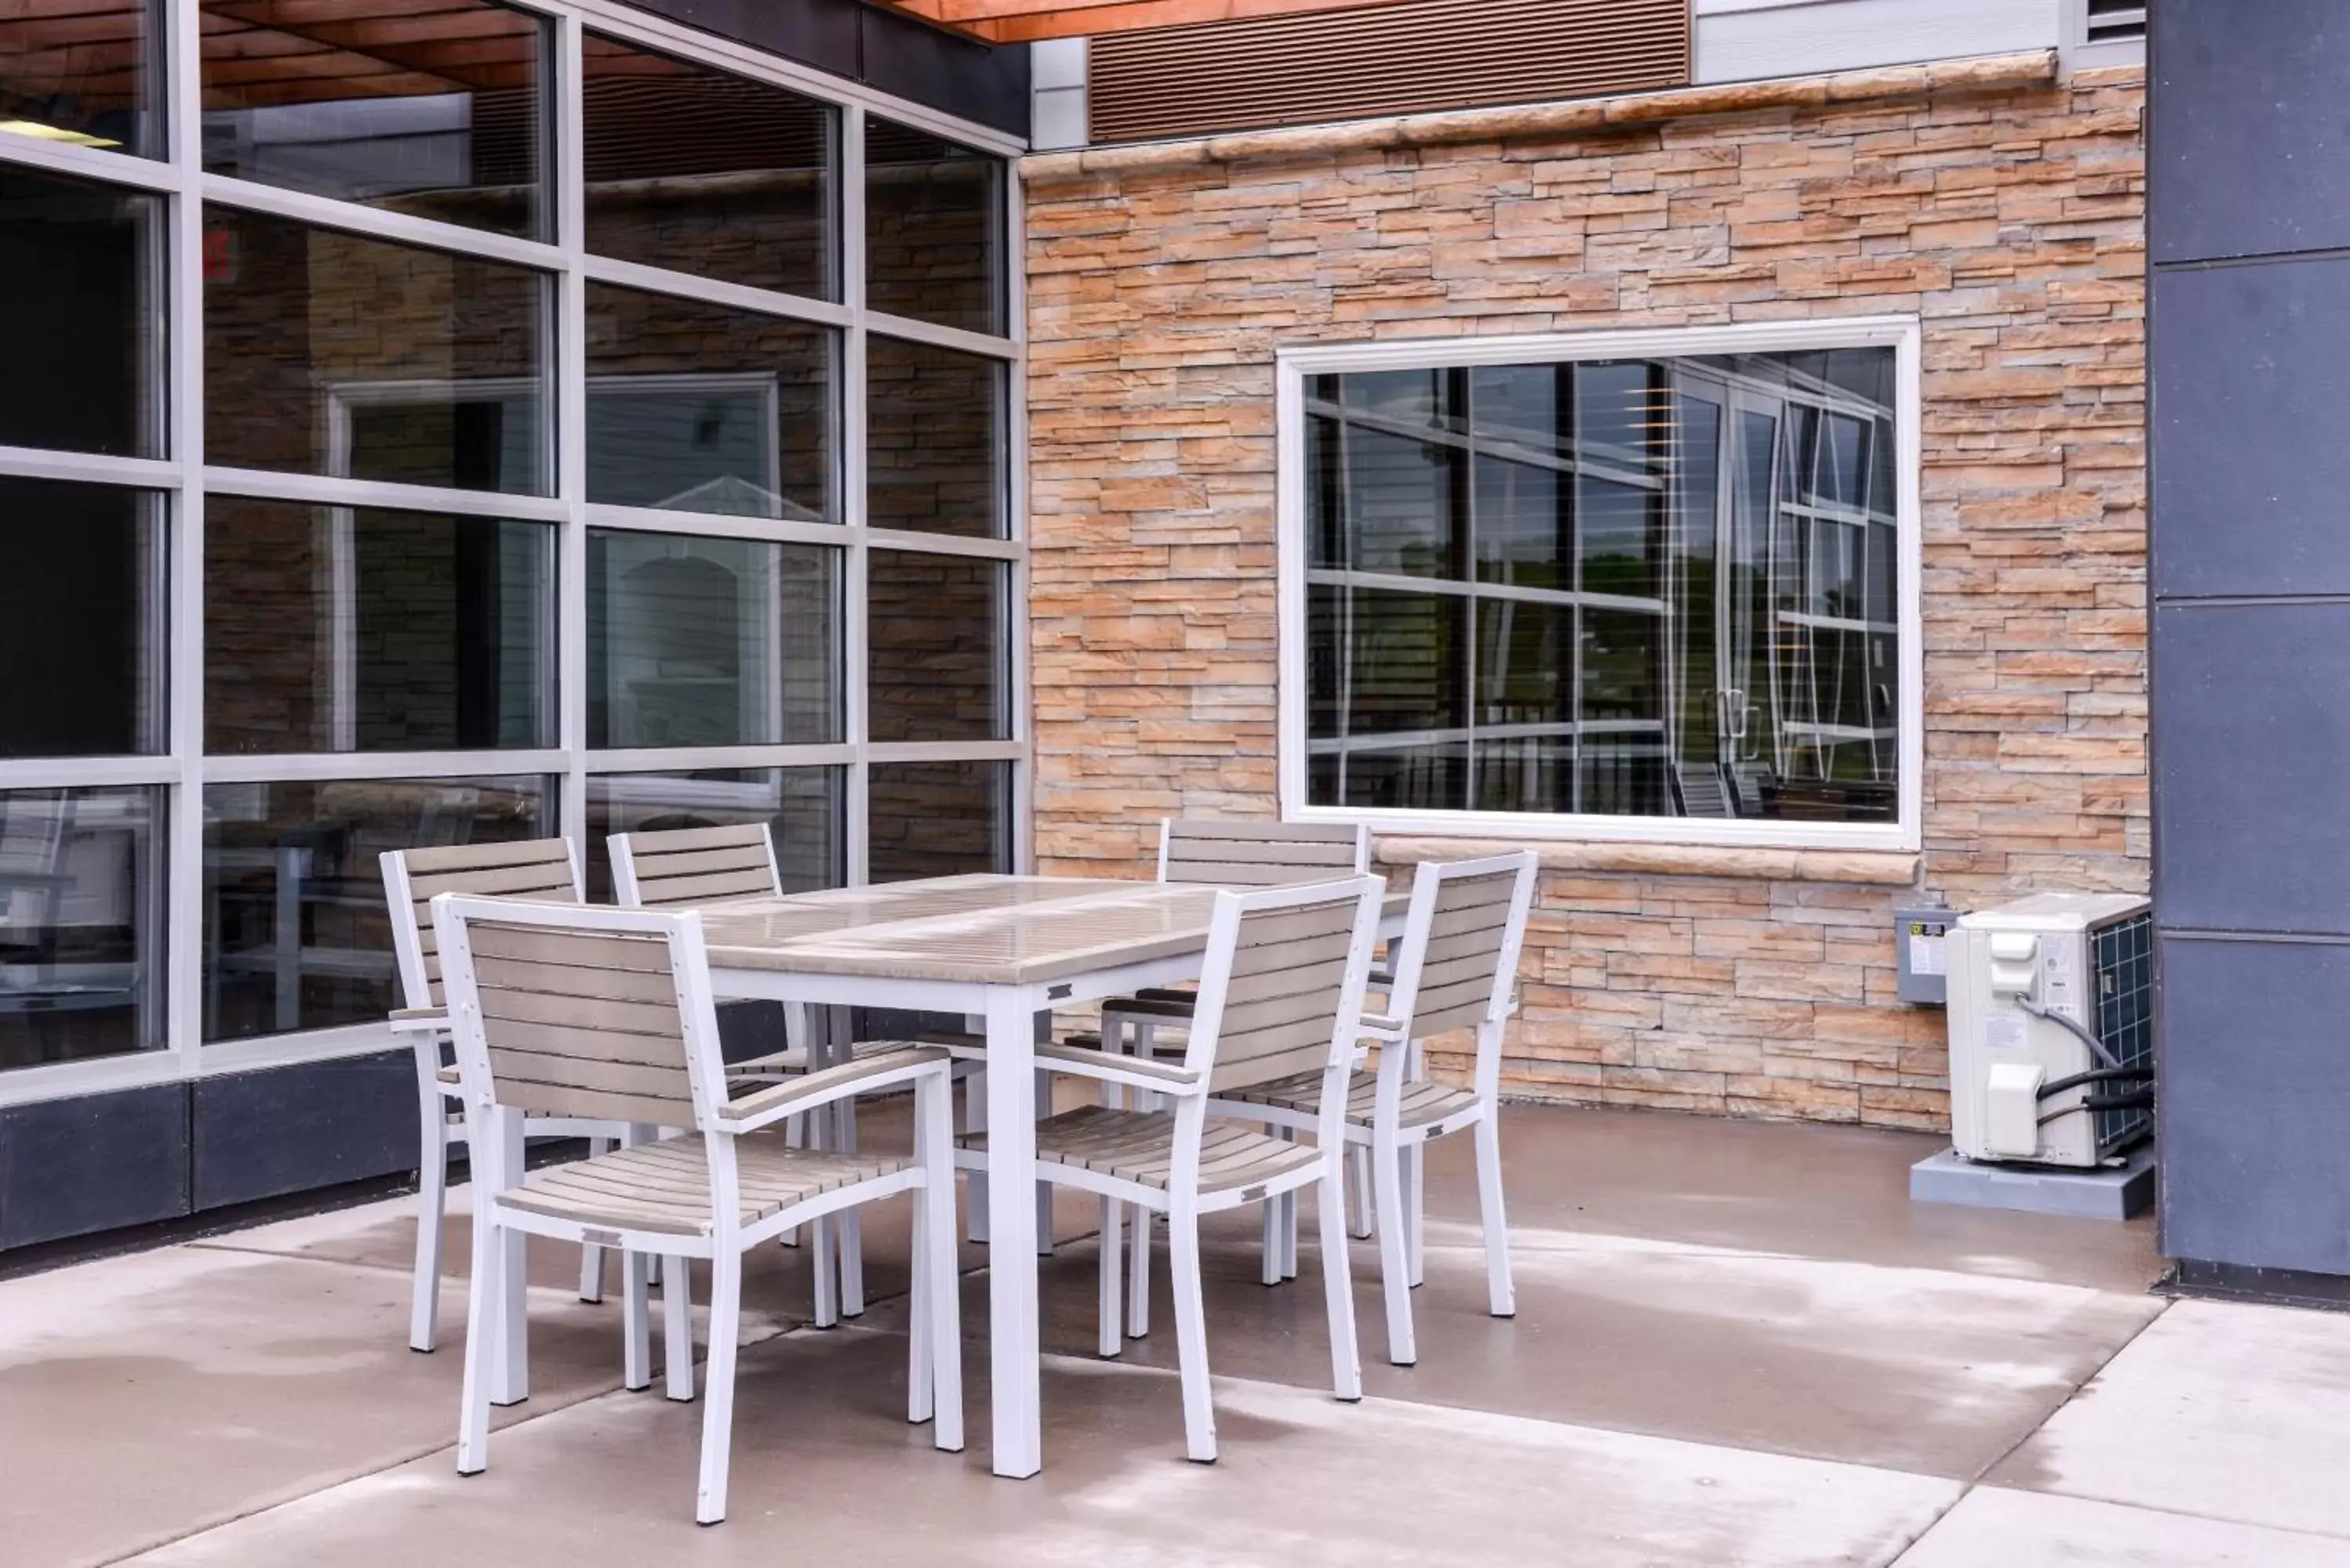 Patio in Country Inn & Suites by Radisson, Ft. Atkinson, WI